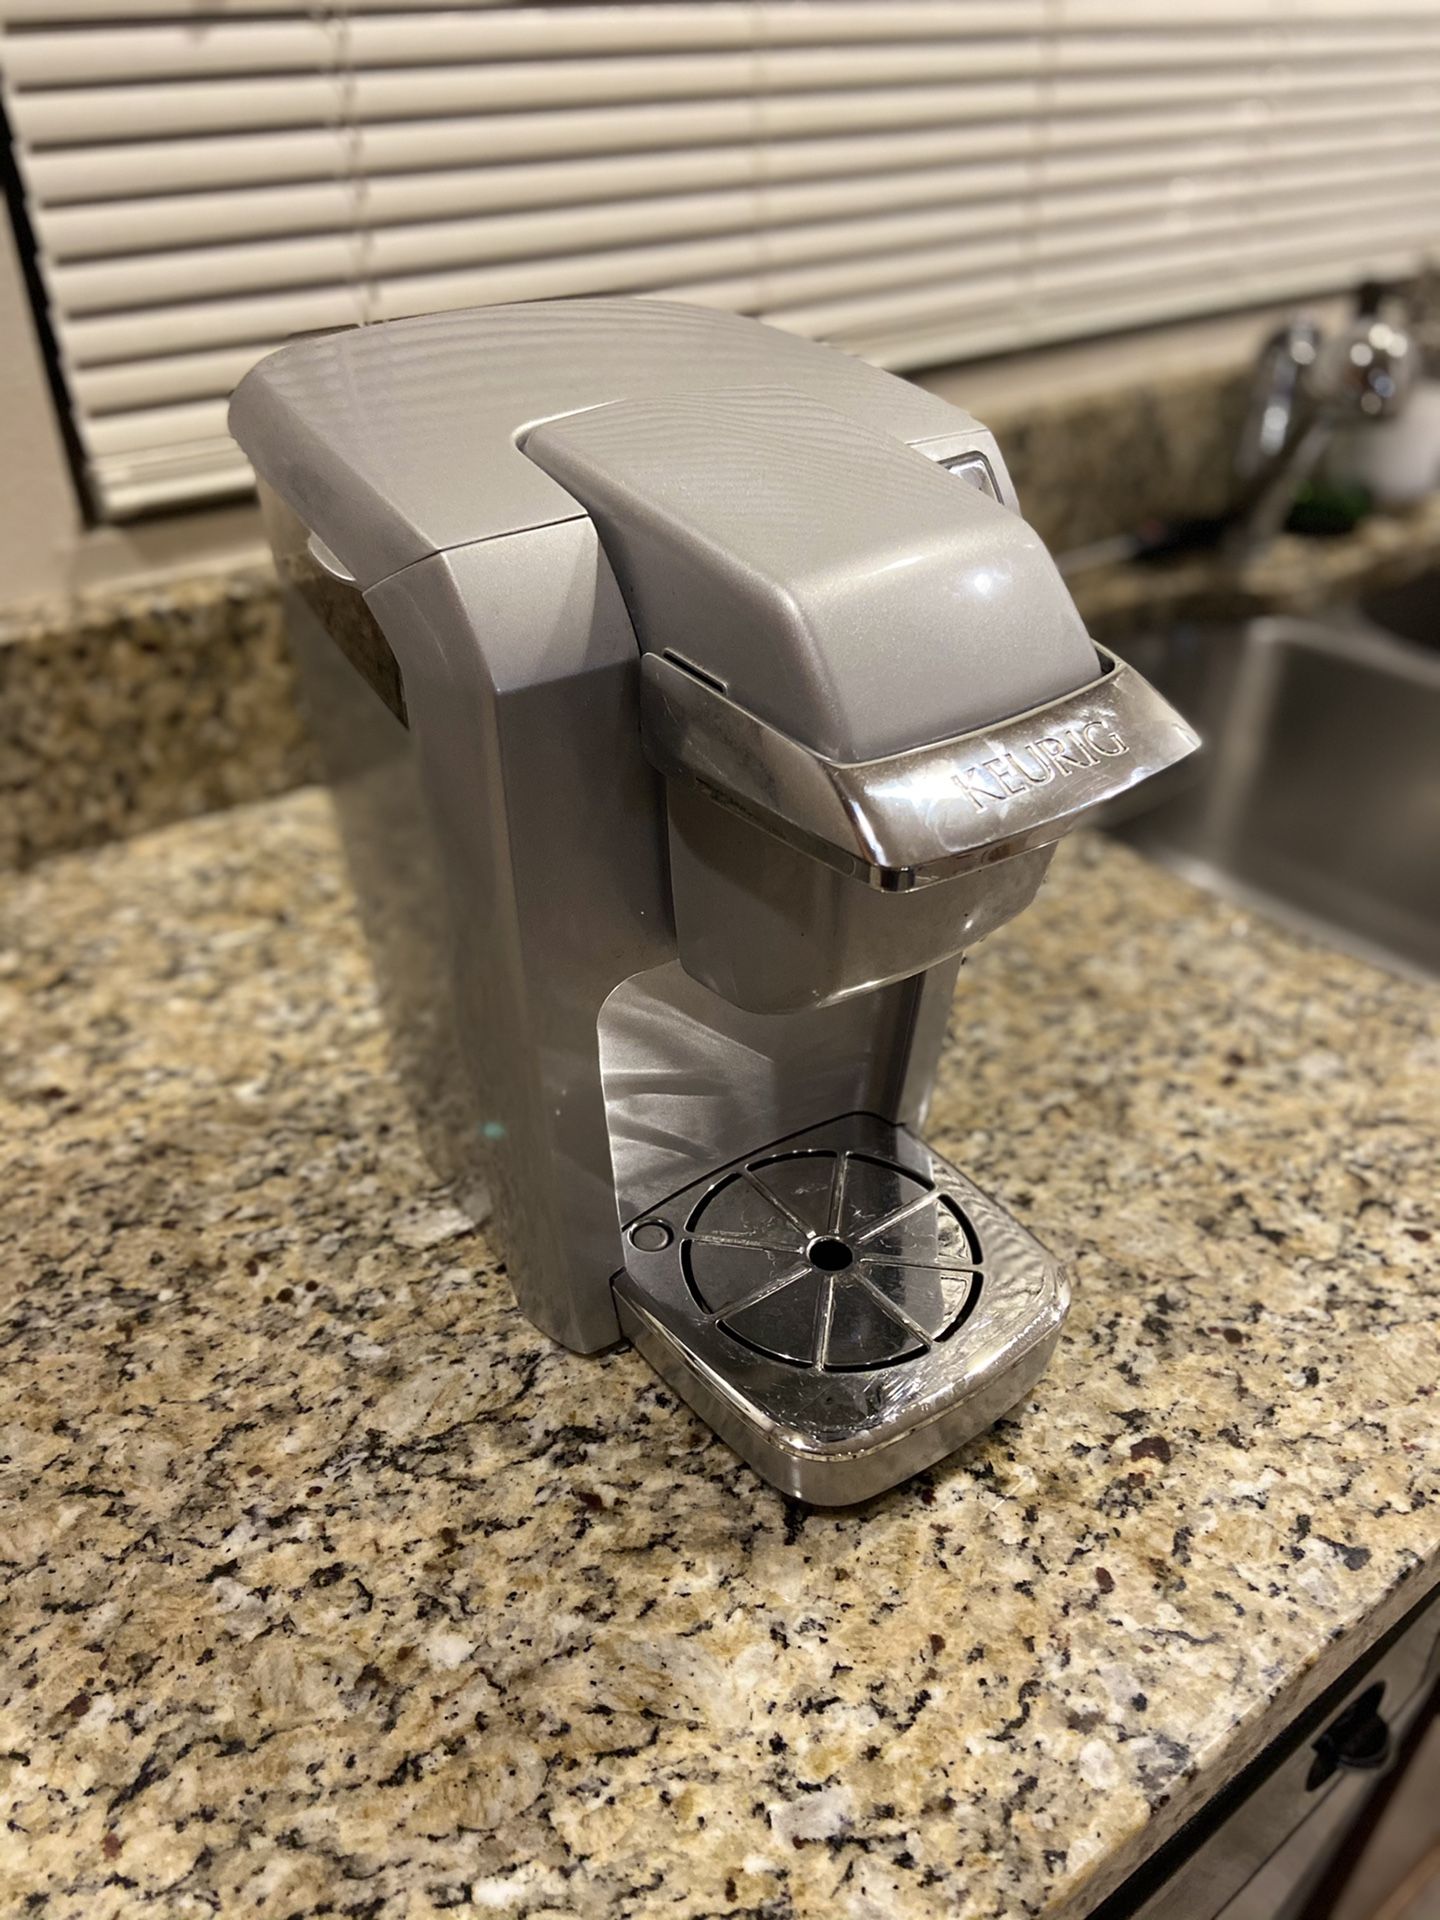 For free! Well maintained and working used Keurig!